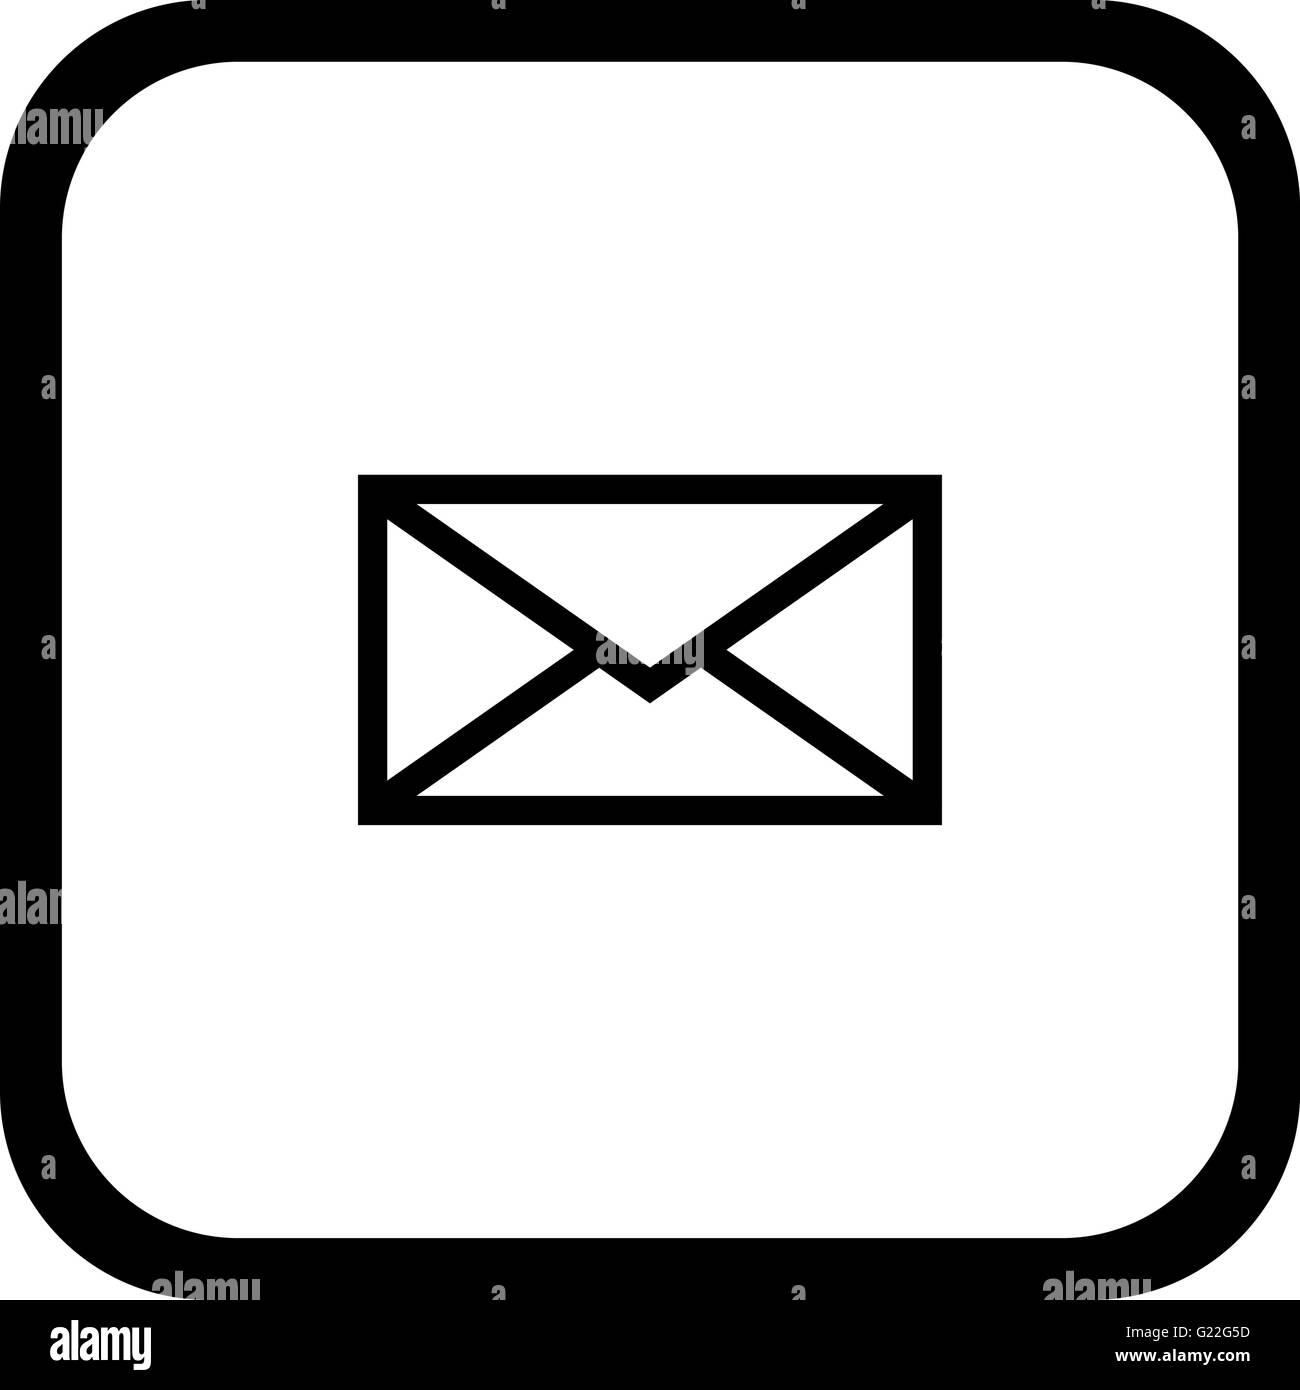 Email symbol letter icon - vector. Stock Vector